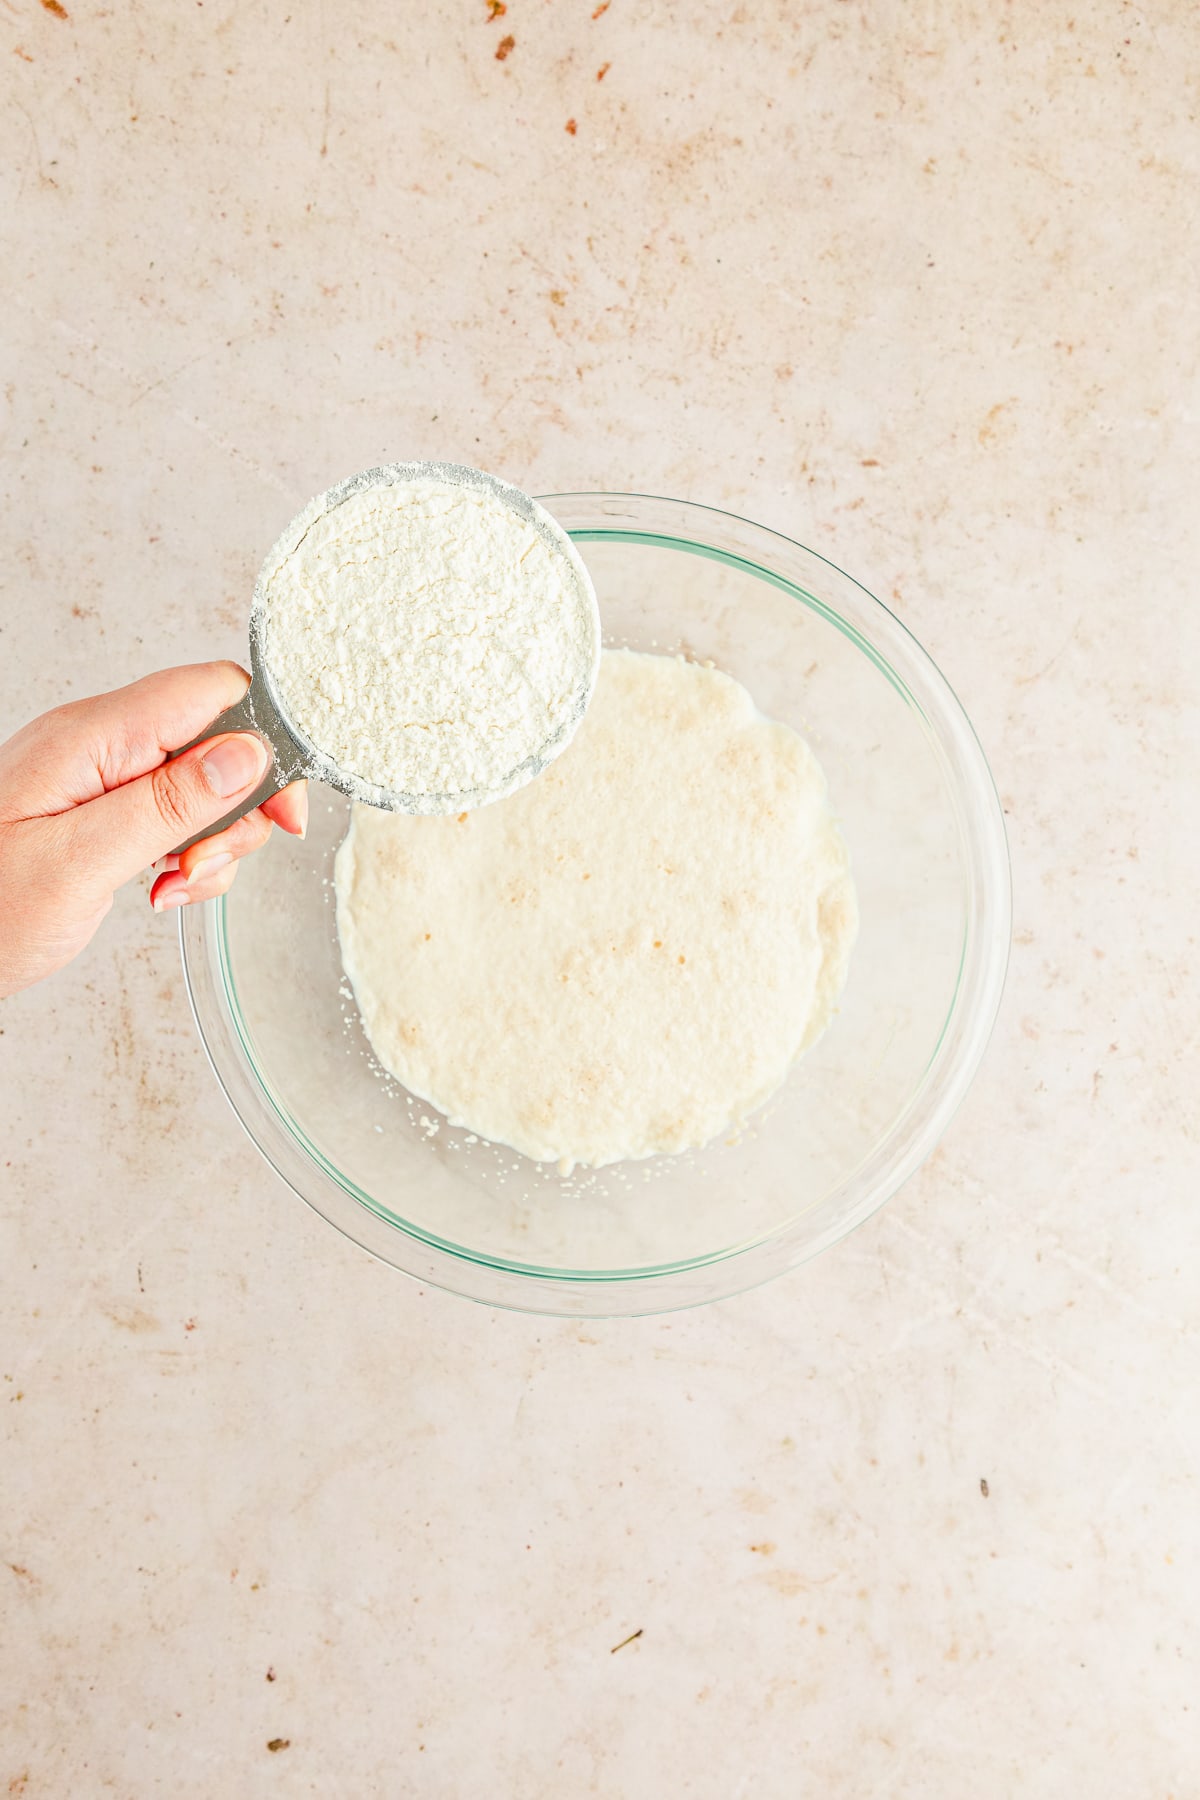 hand holding a cup of flour in a measuring cup over a mixture for dough in a glass bowl.